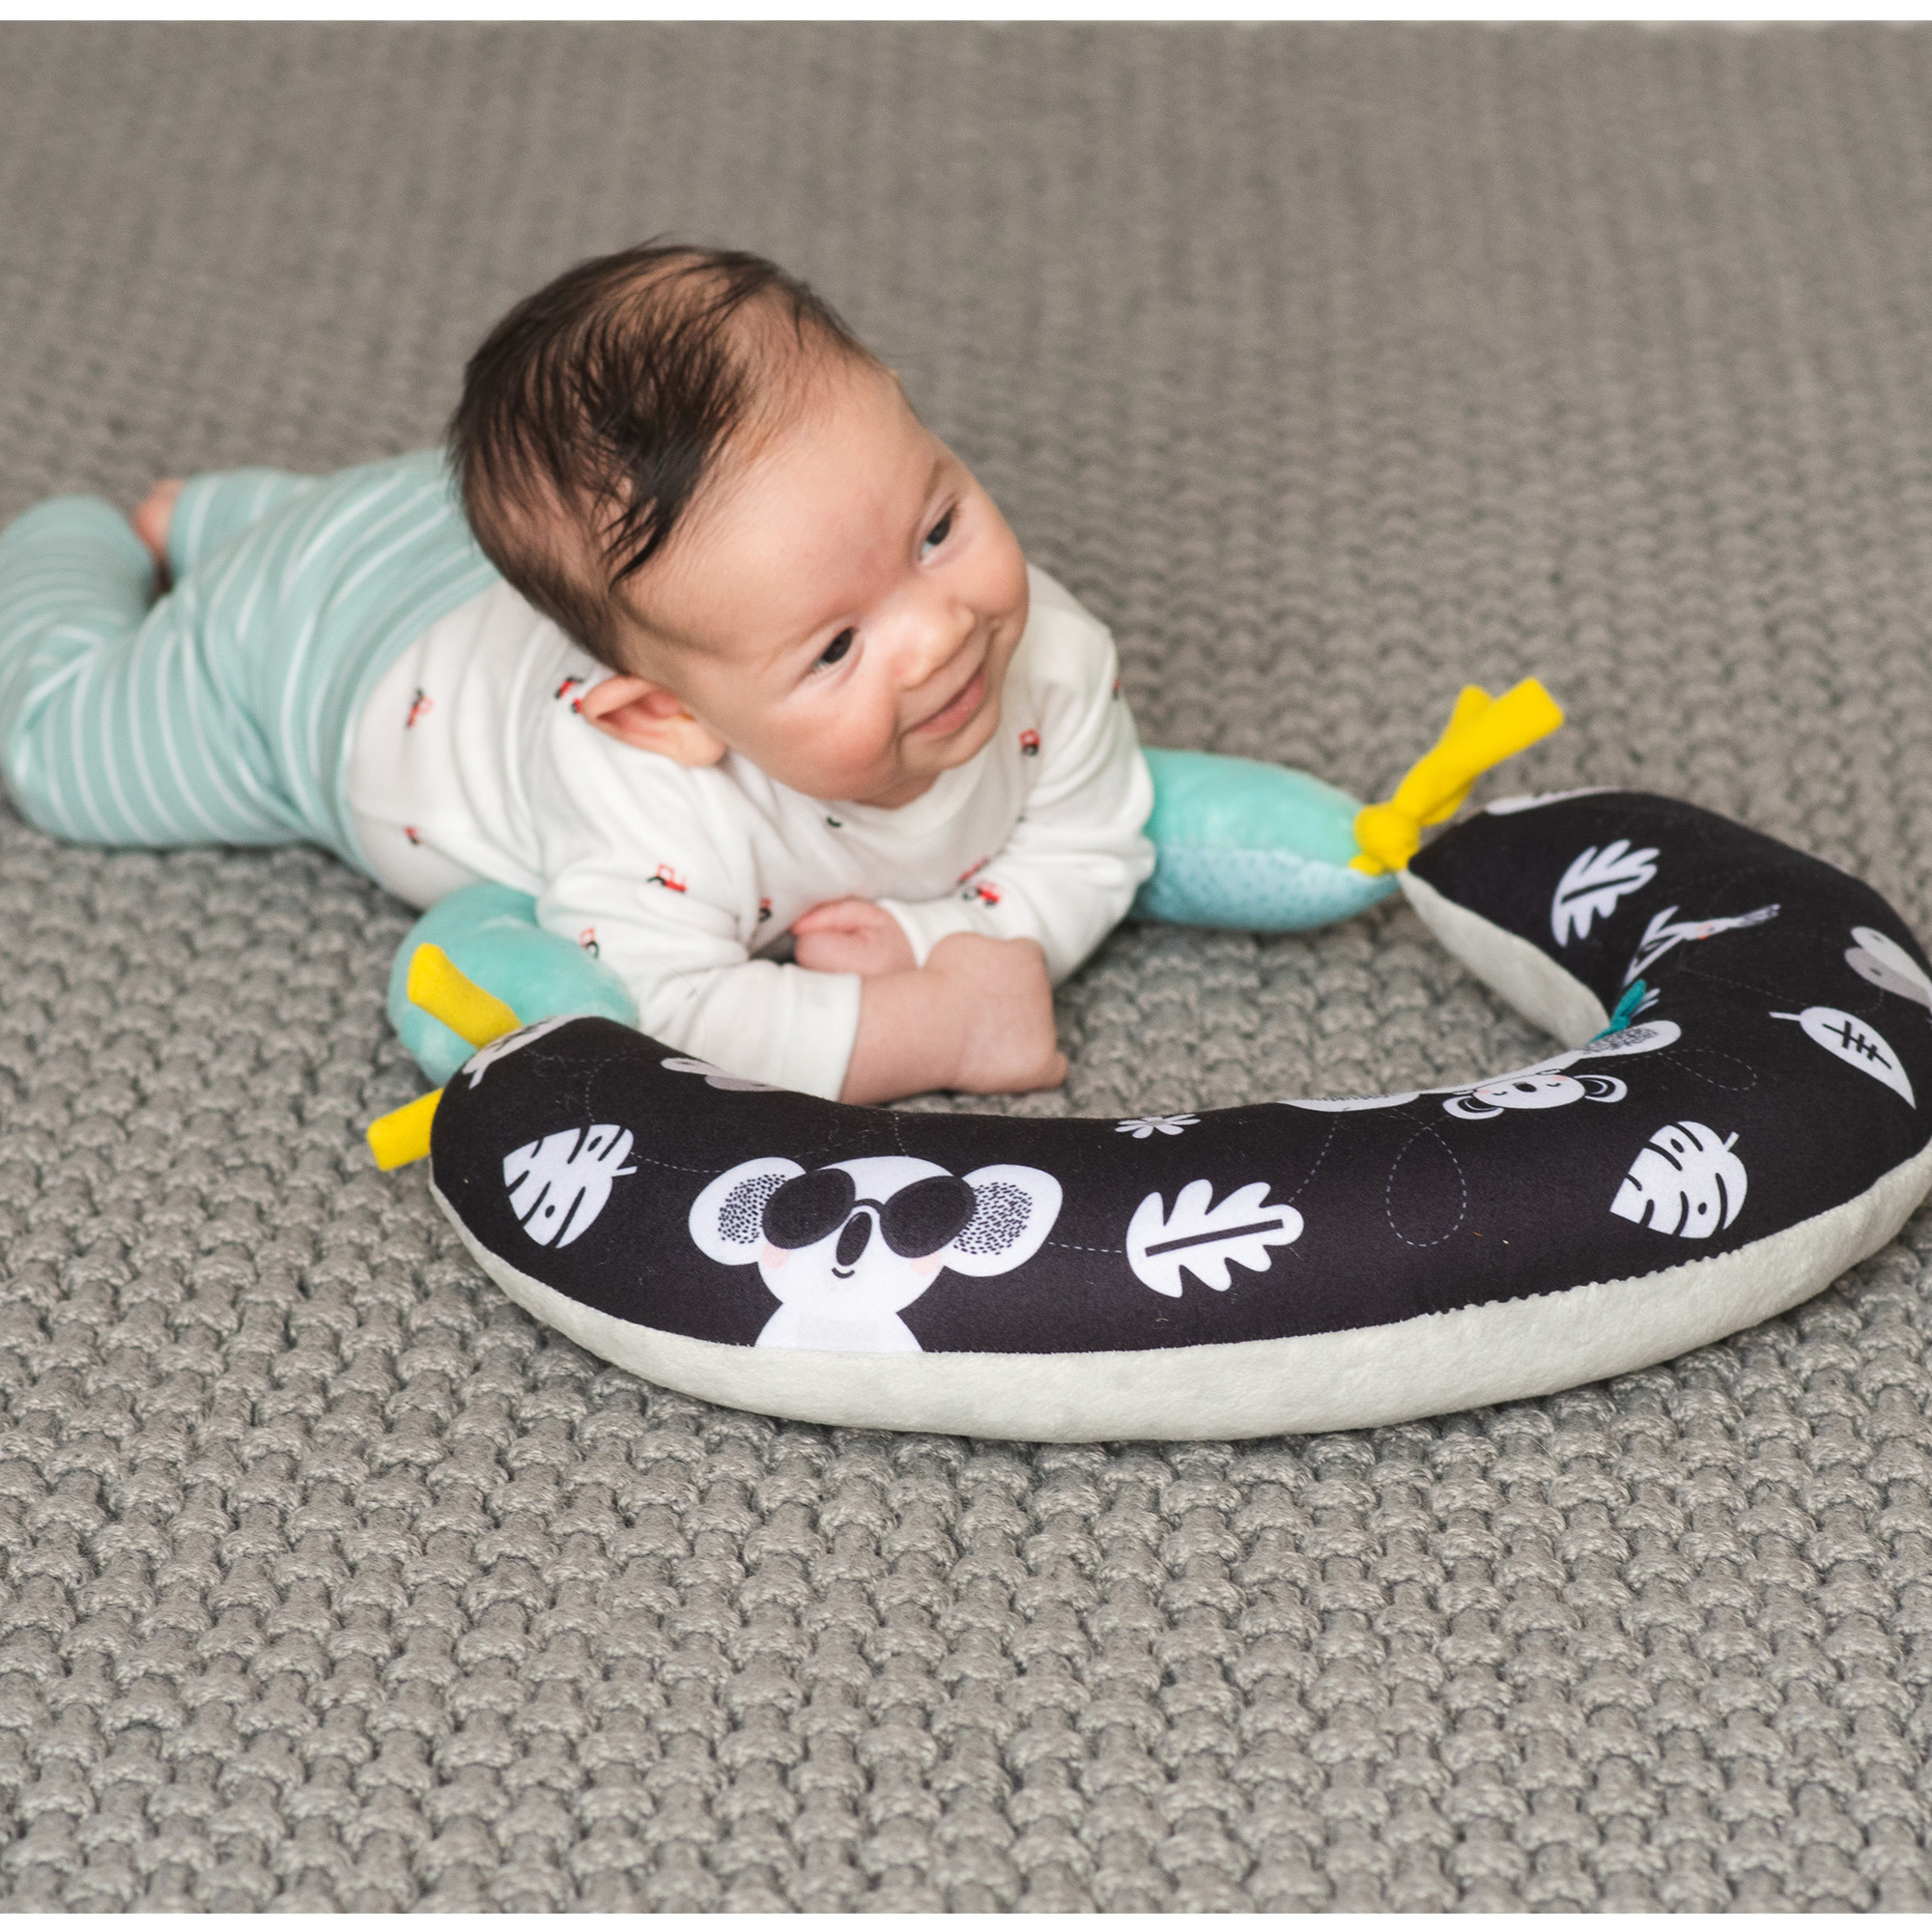 Taf Toys 2 in 1 Tummy time Pillow